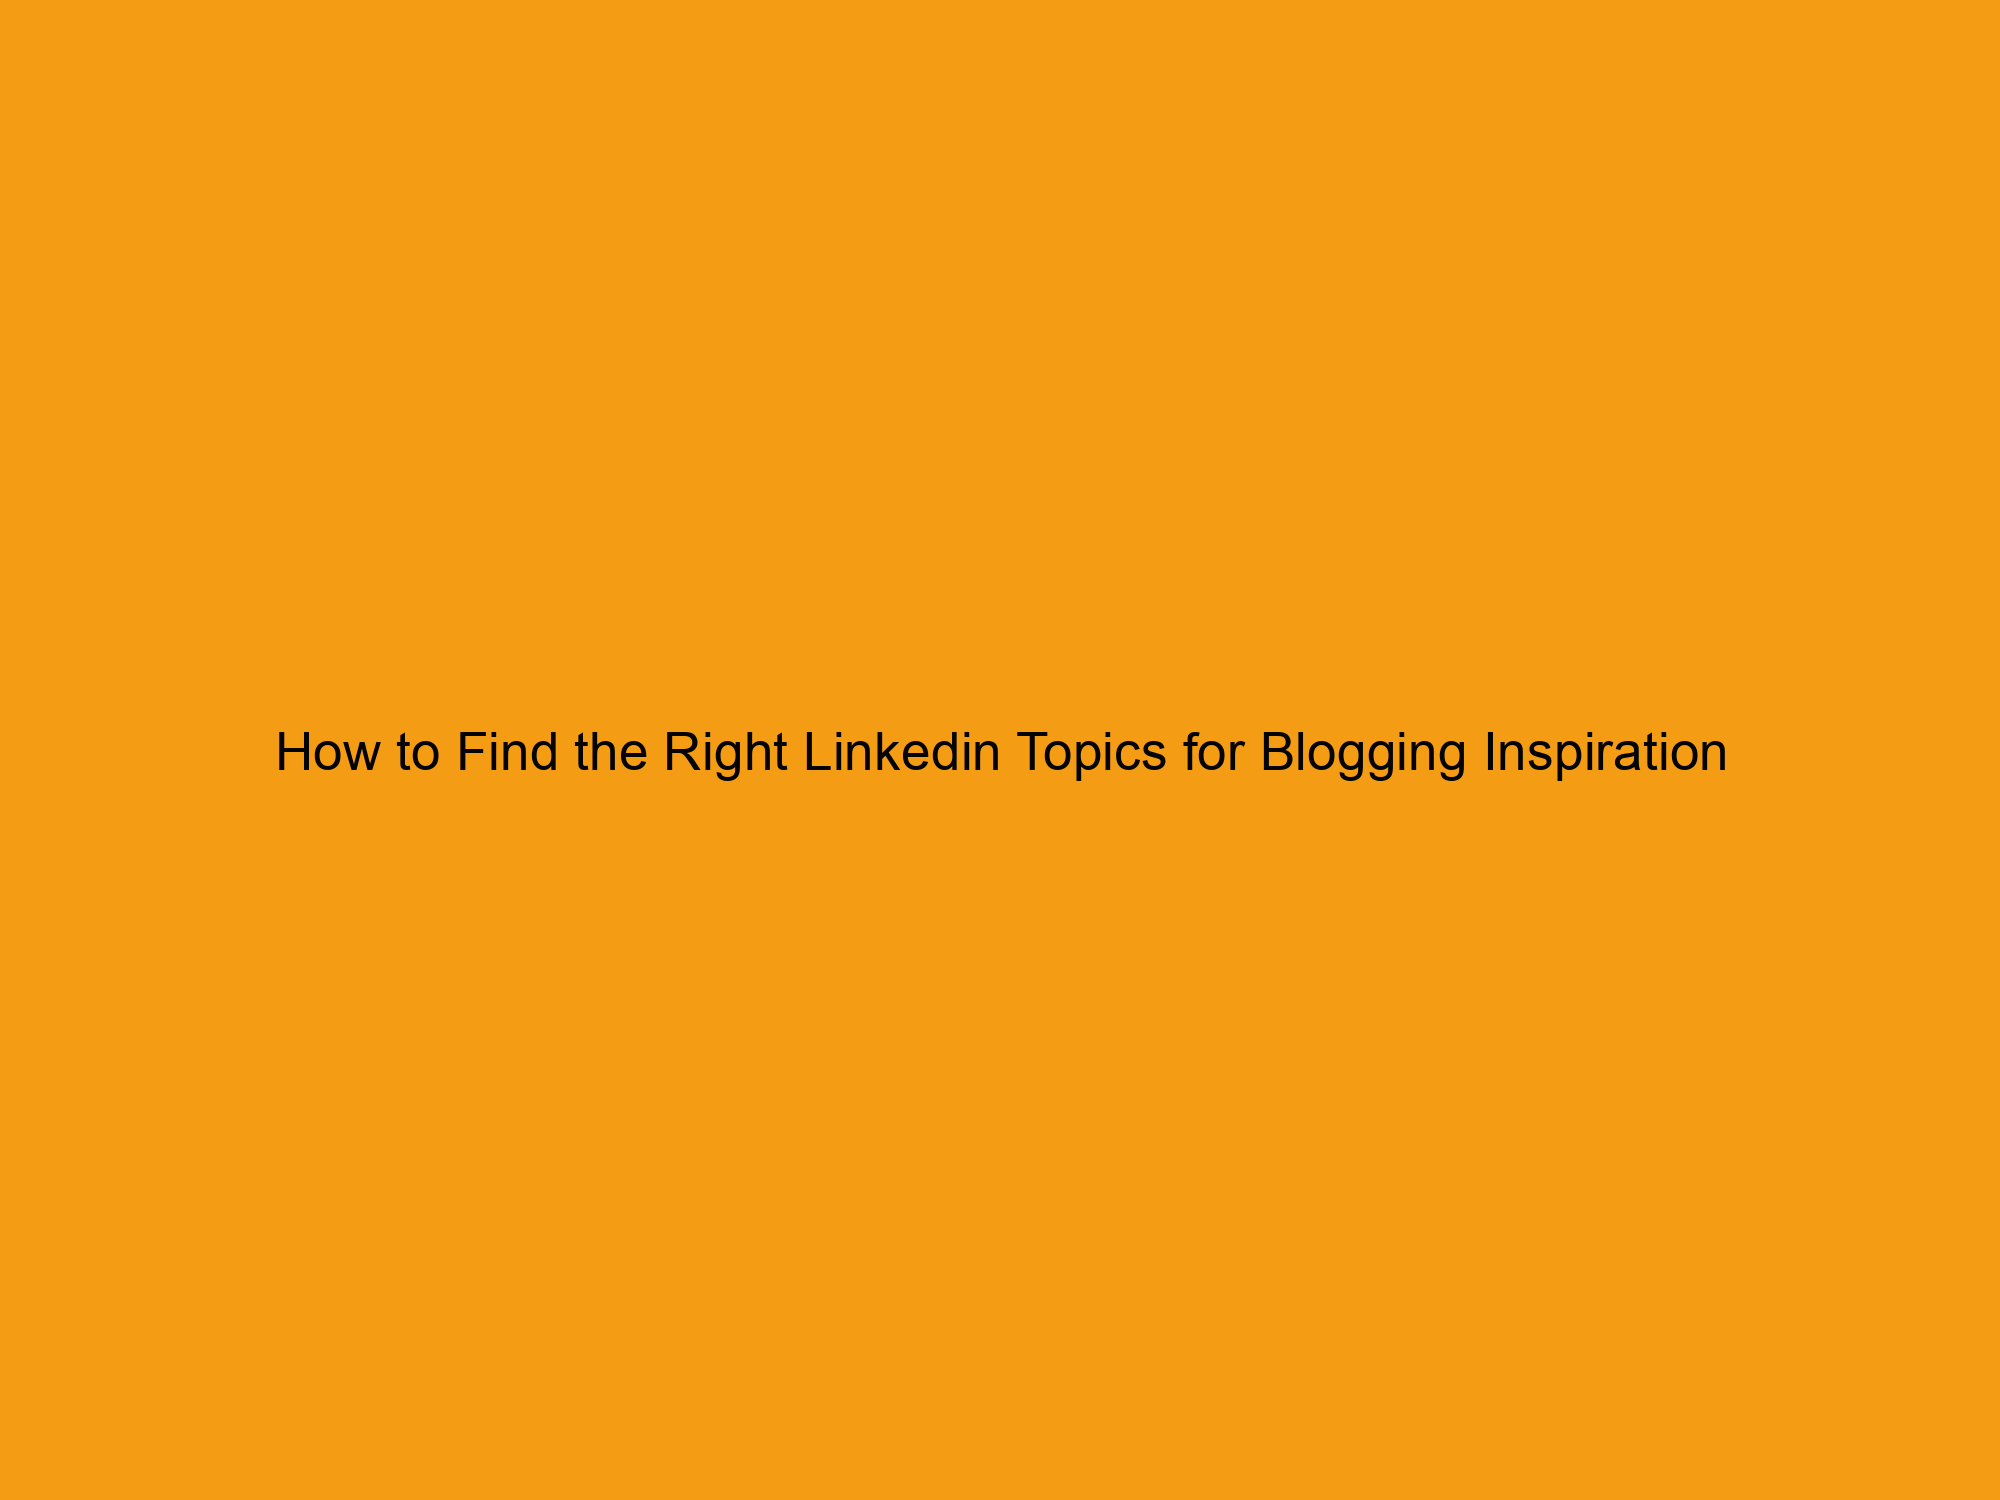 How to Find the Right Linkedin Topics for Blogging Inspiration